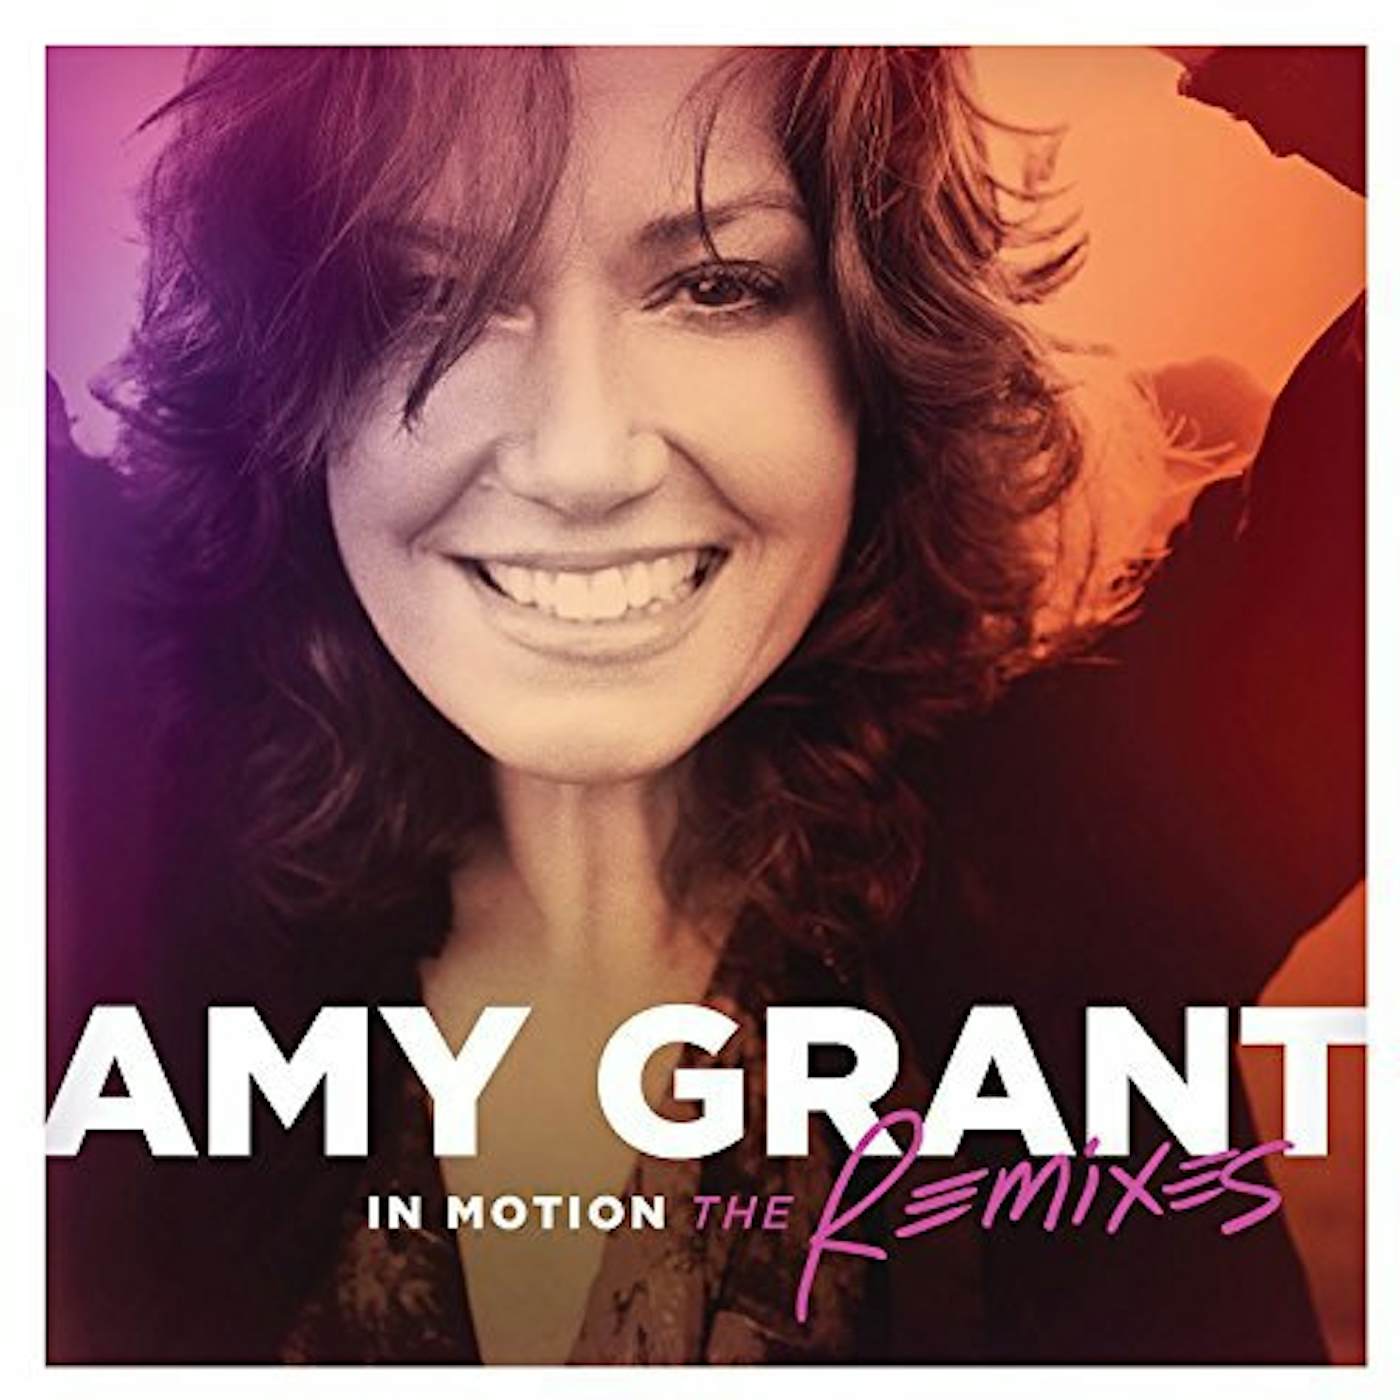 Amy Grant IN MOTION: THE REMIXES Vinyl Record